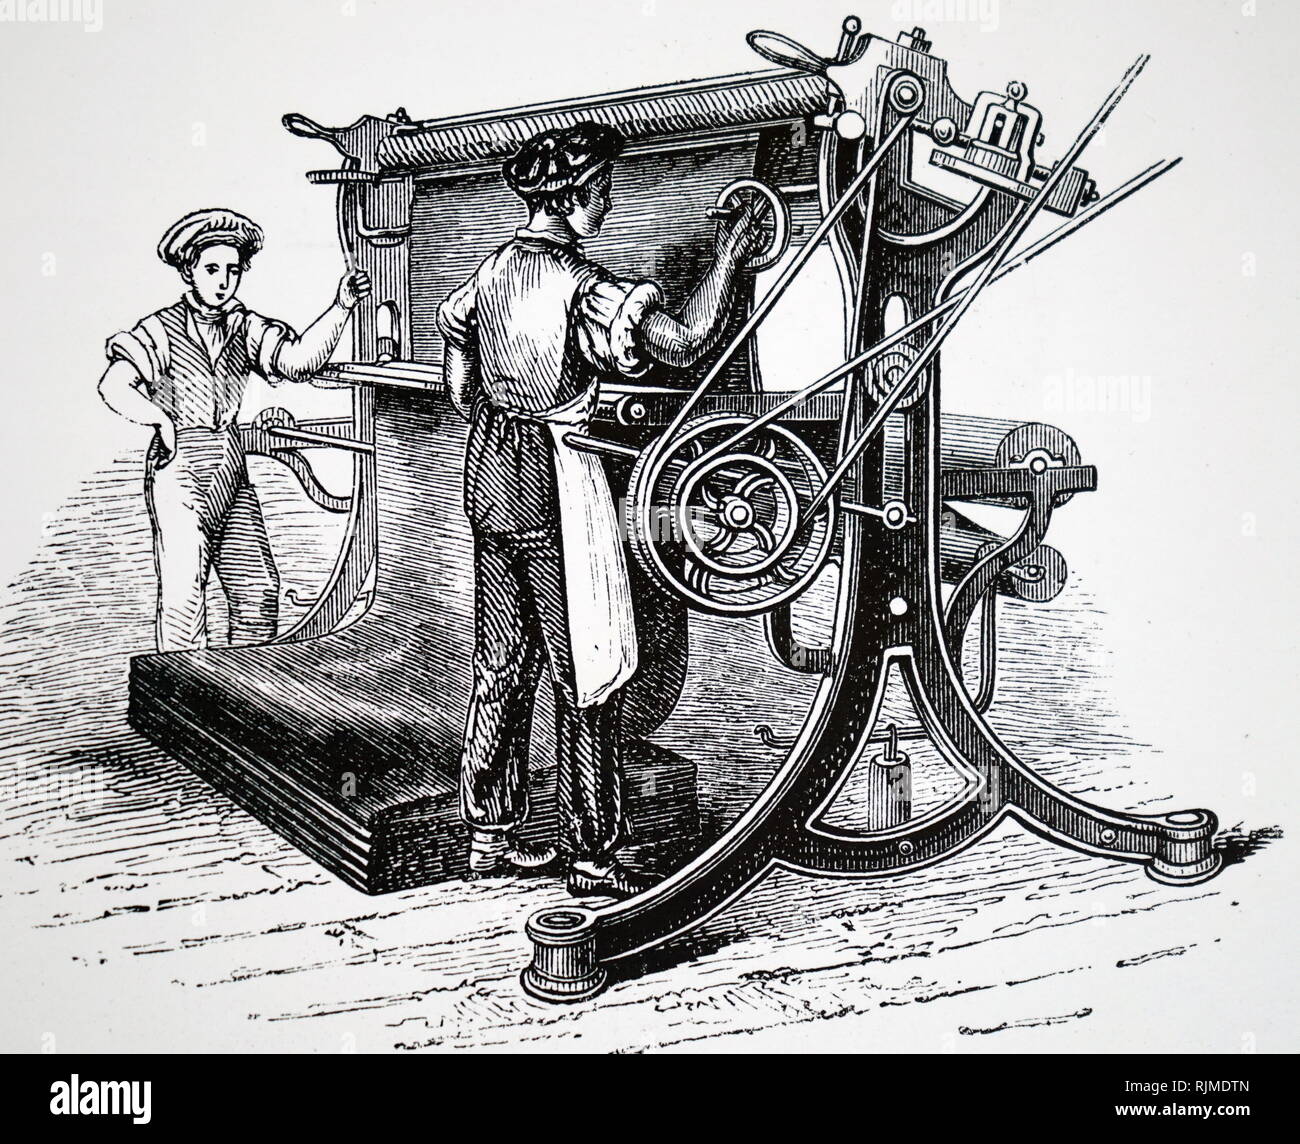 Illustration showing shearing woollen cloth with a machine called a broad-perpetual”: John Brooke & Sons, Armitage Bridge, near Huddersfield, Yorkshire. (c. 1845) Stock Photo